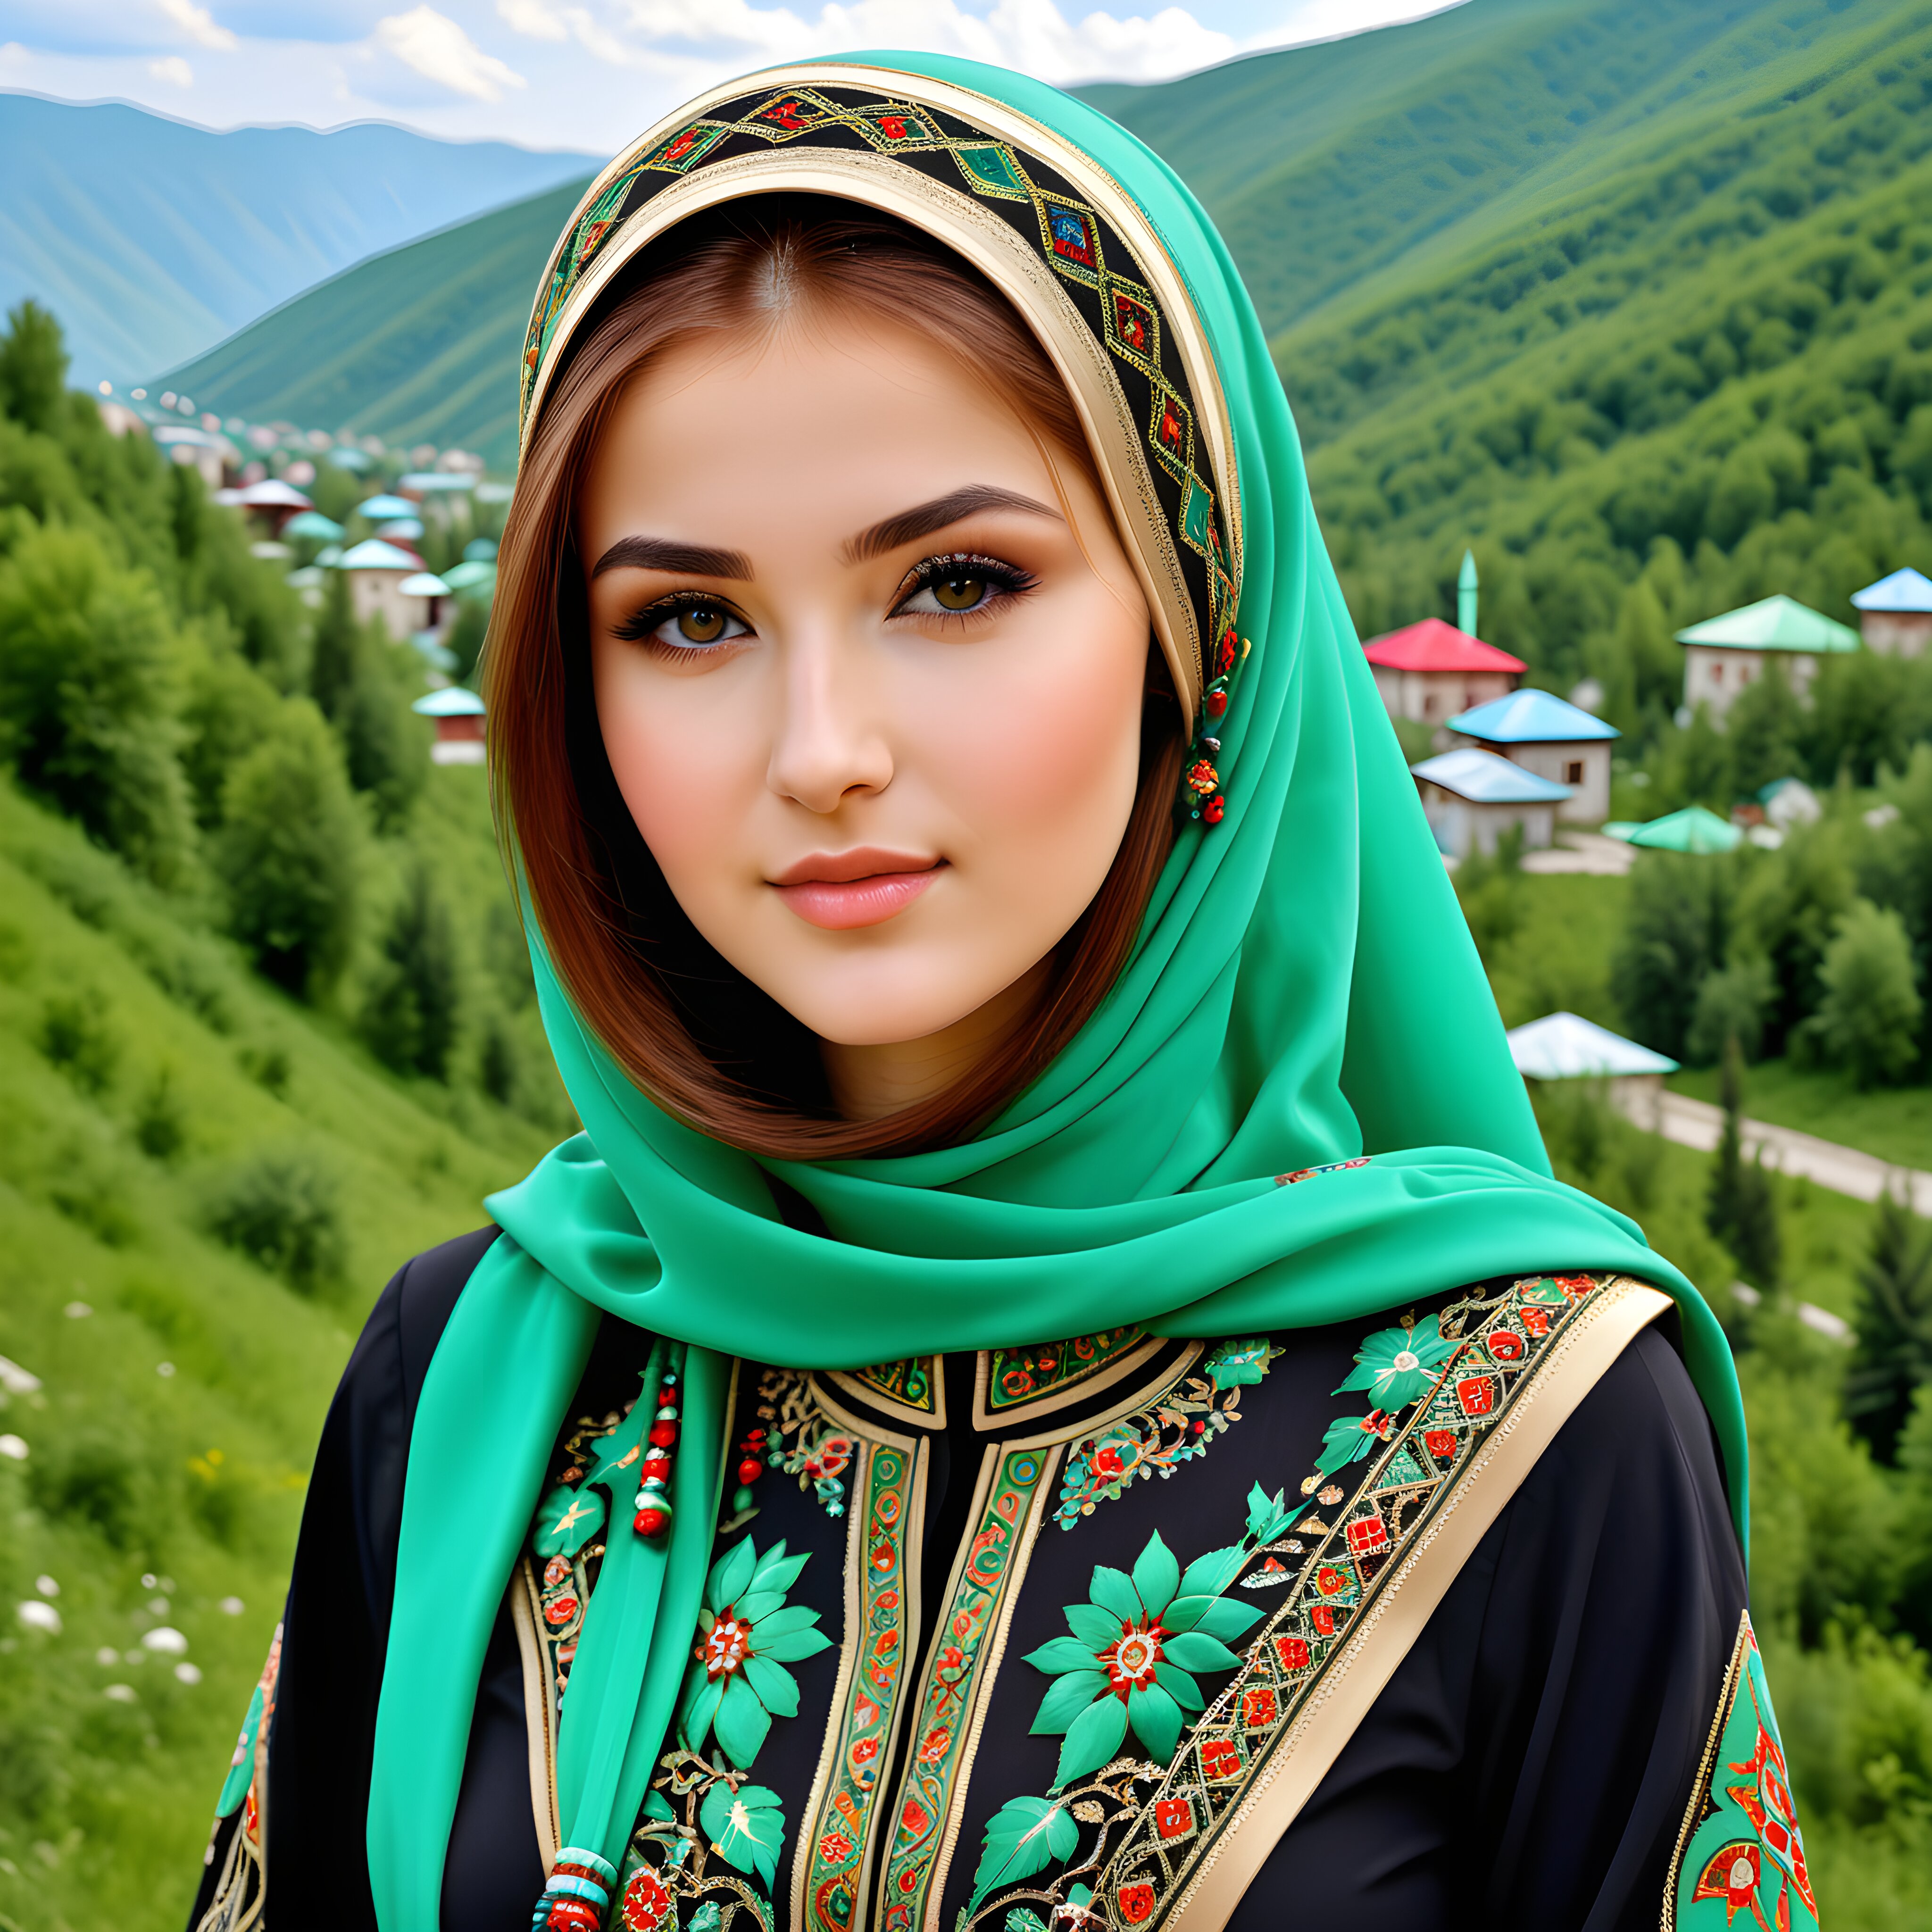 A girl in a traditional dress